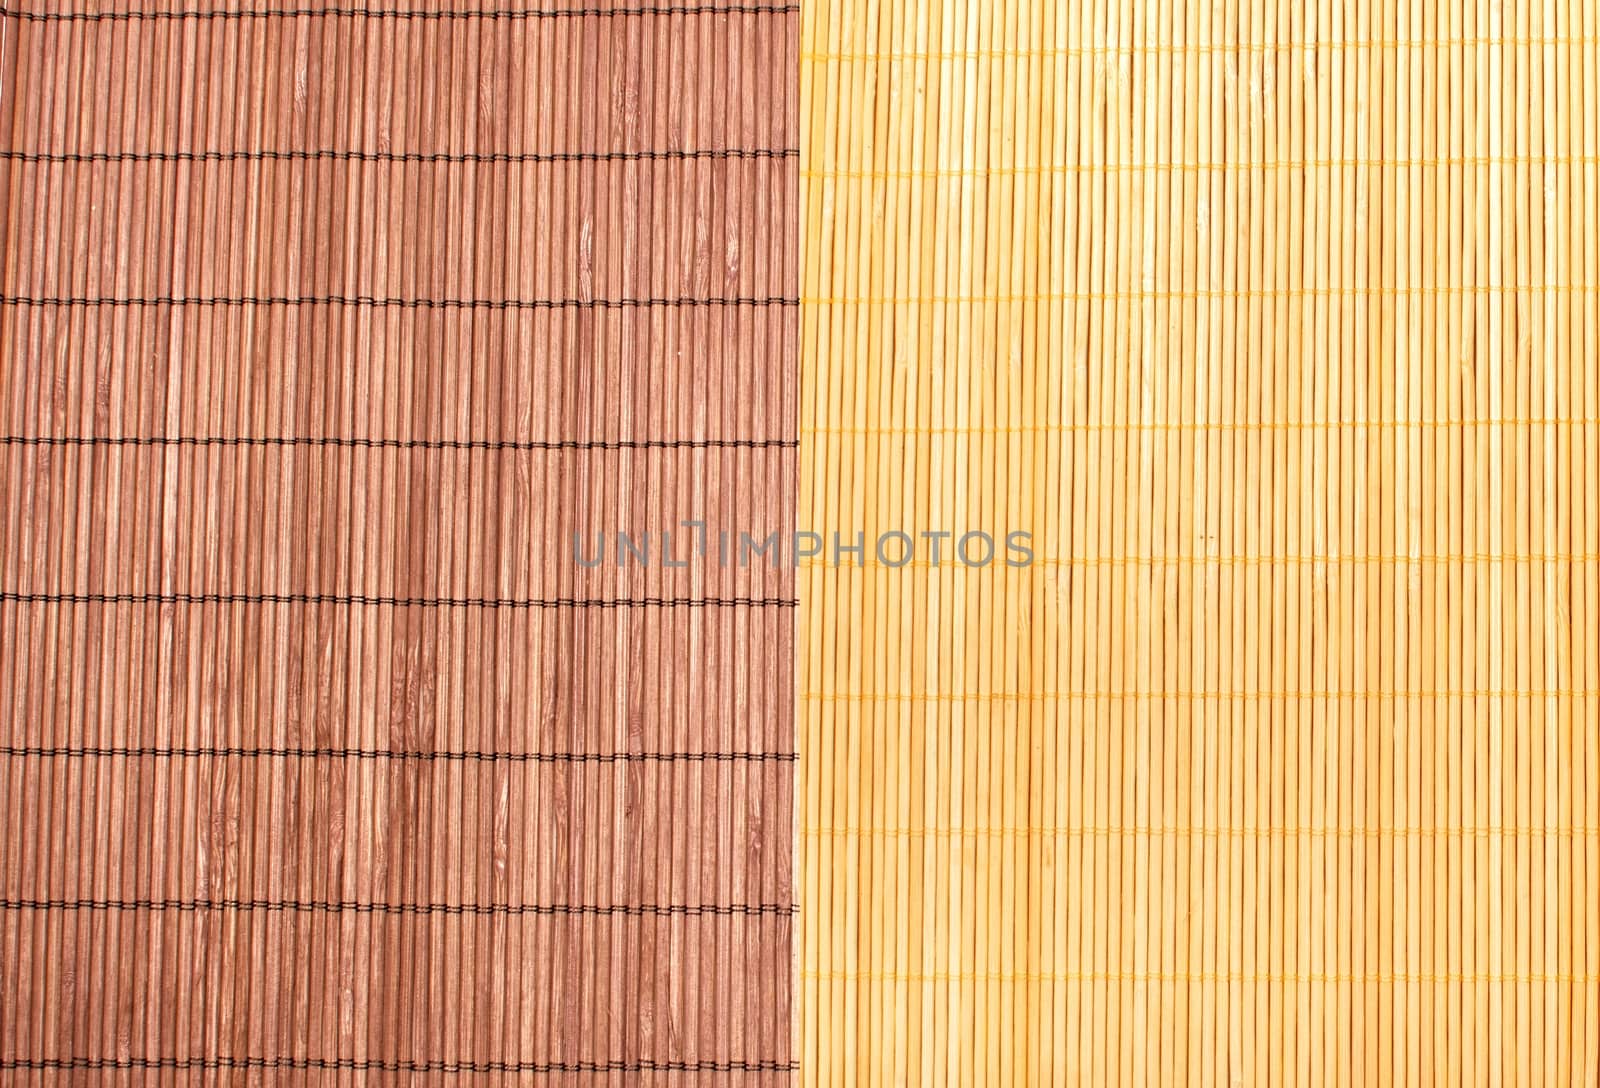 Bamboo brown straw mat as abstract texture background composition by mitakag